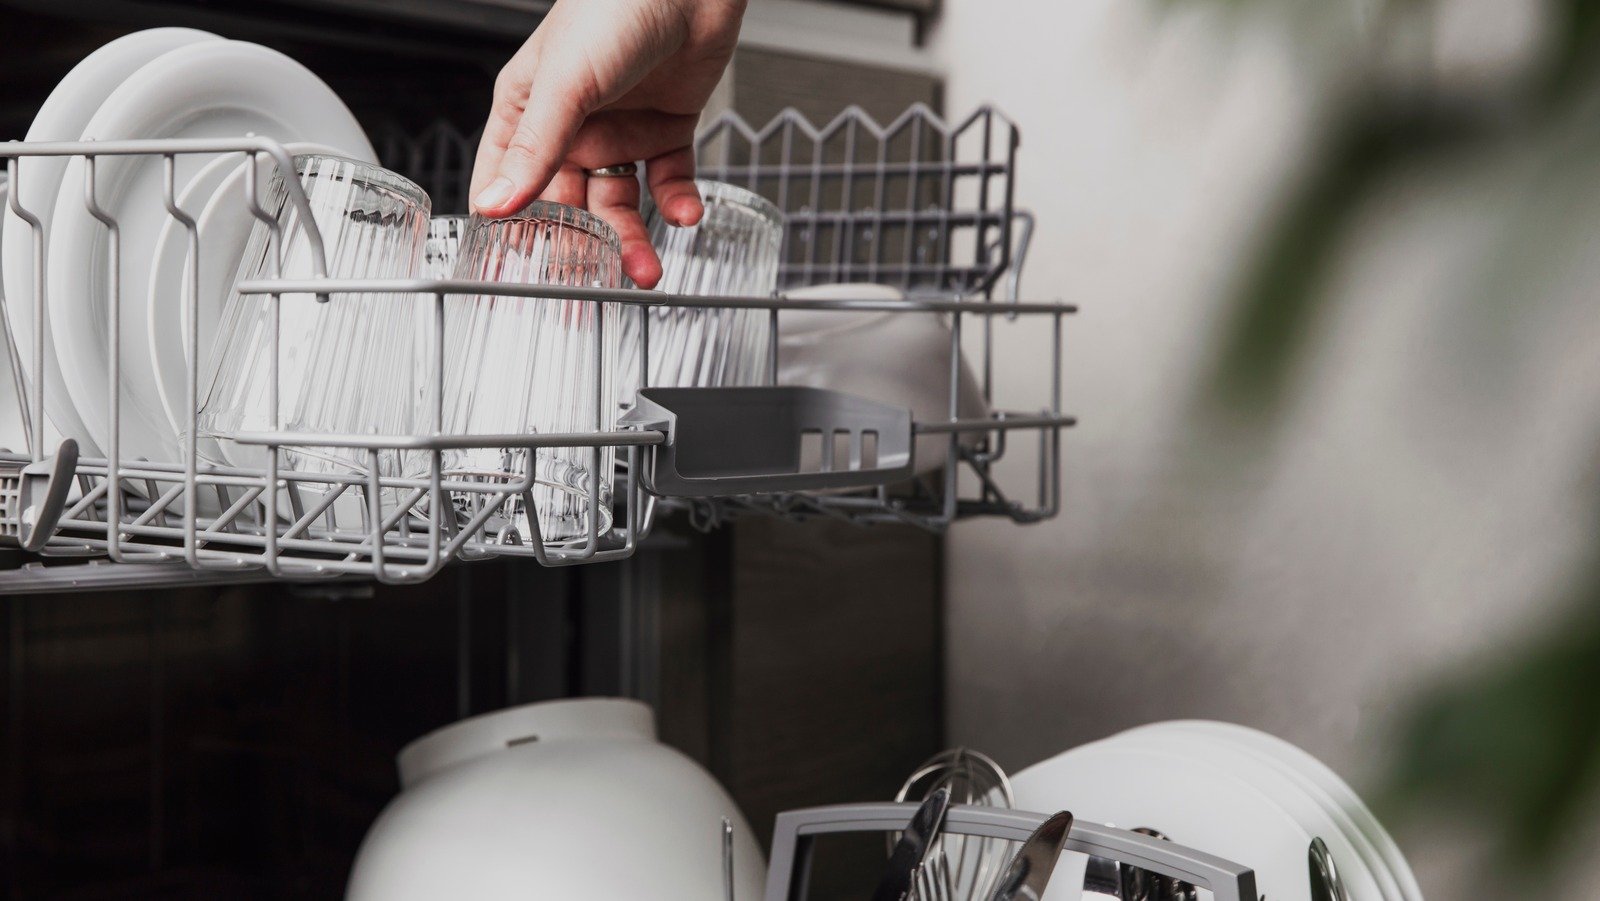 5 Tips For Loading Your Dishwasher So Every Dish Gets Squeaky Clean